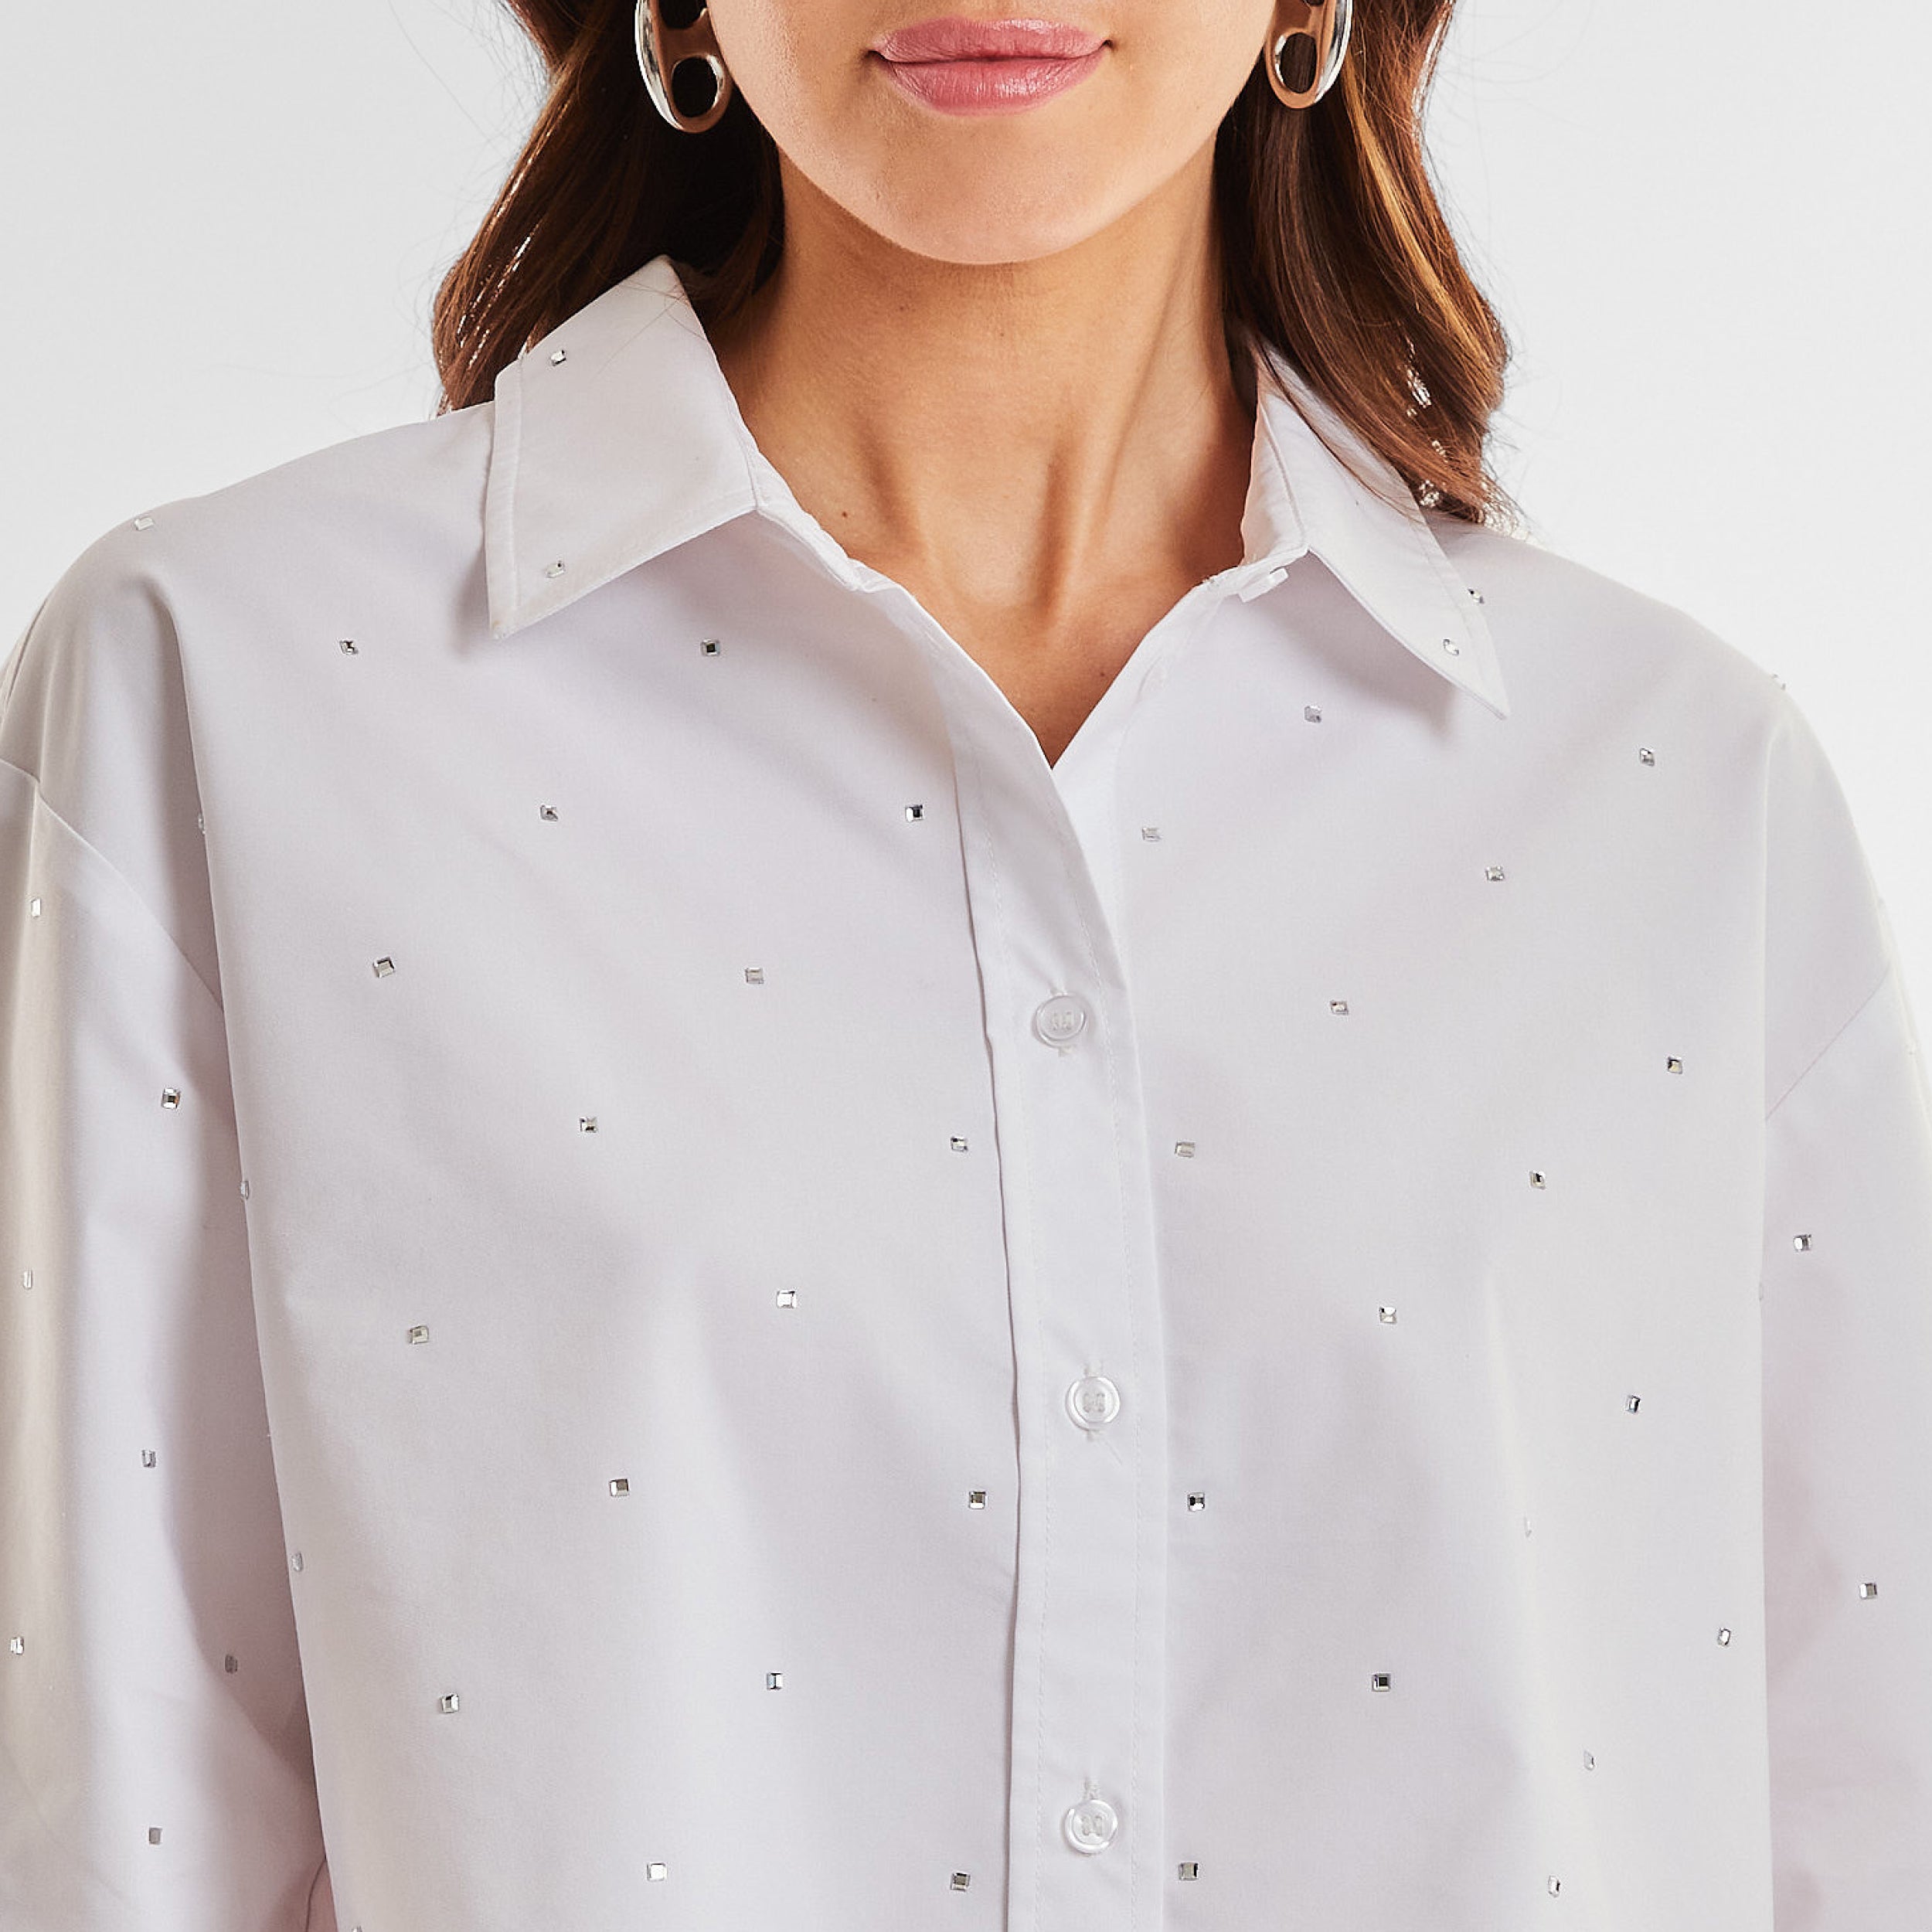 Close up front view of woman wearing a white cropped button down shirt with crystal embellishments.